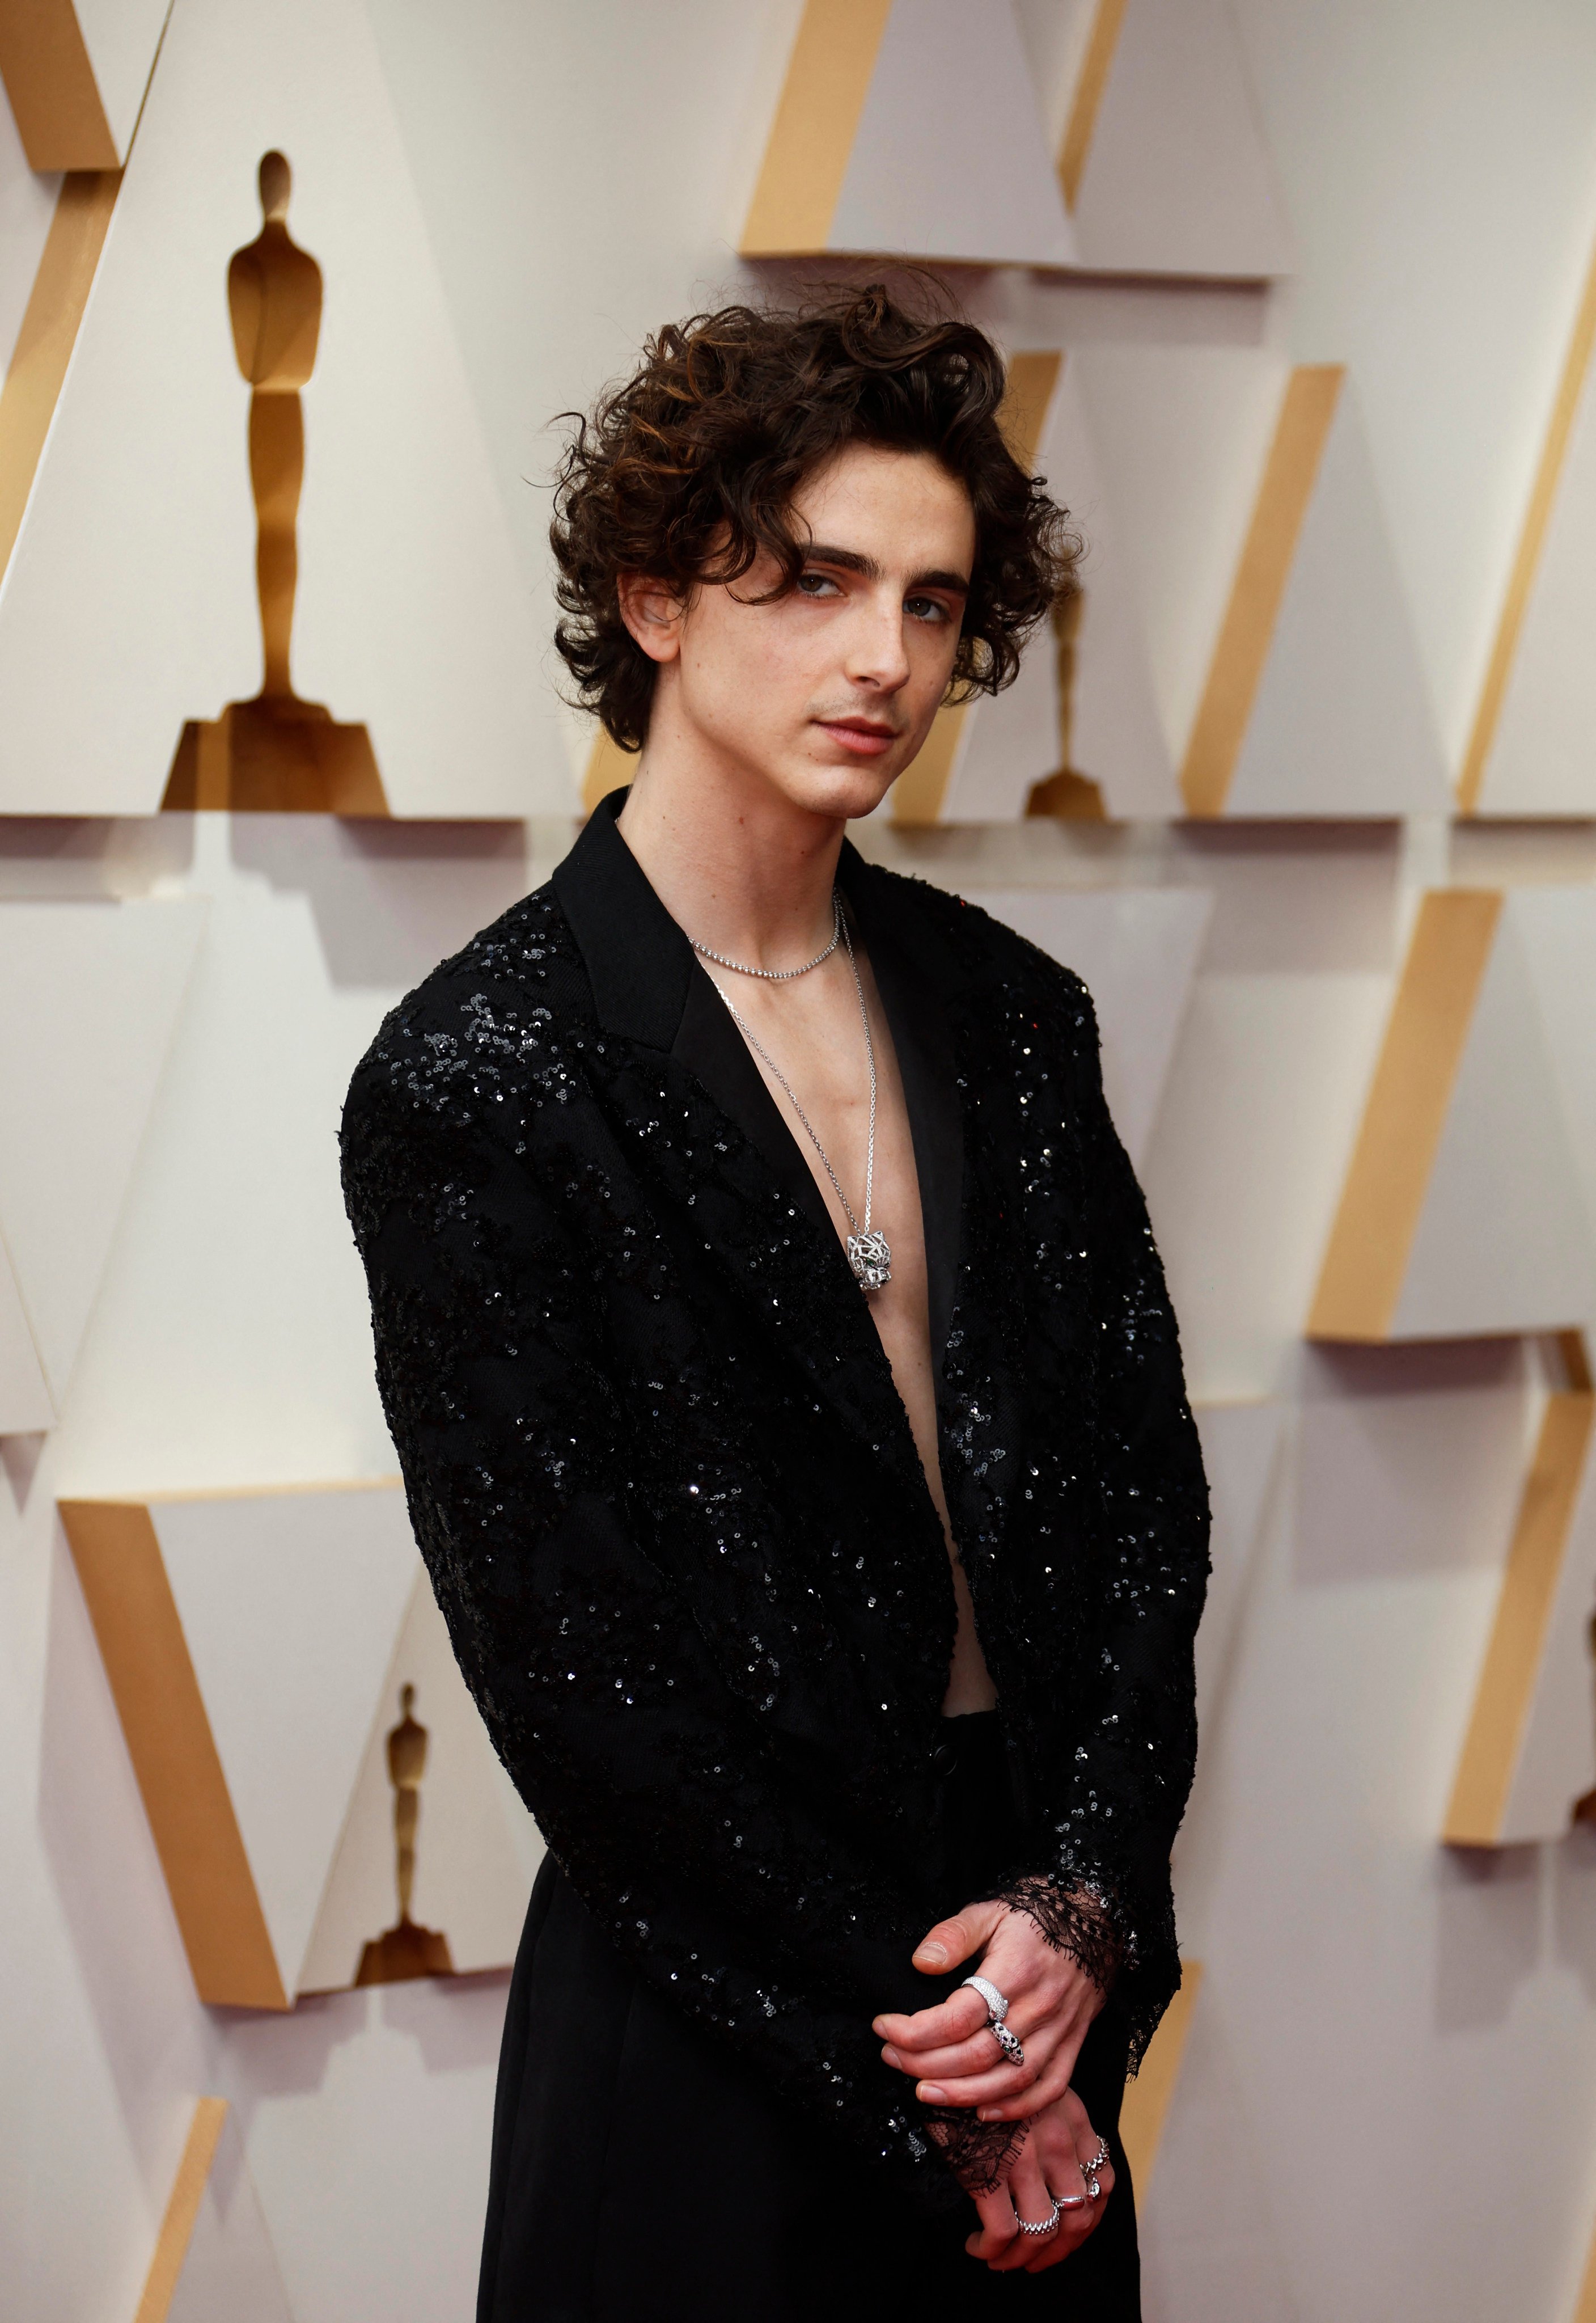 Timothée Chalamet on the red carpet at the 2022 Oscars in March. Photo: Reuters